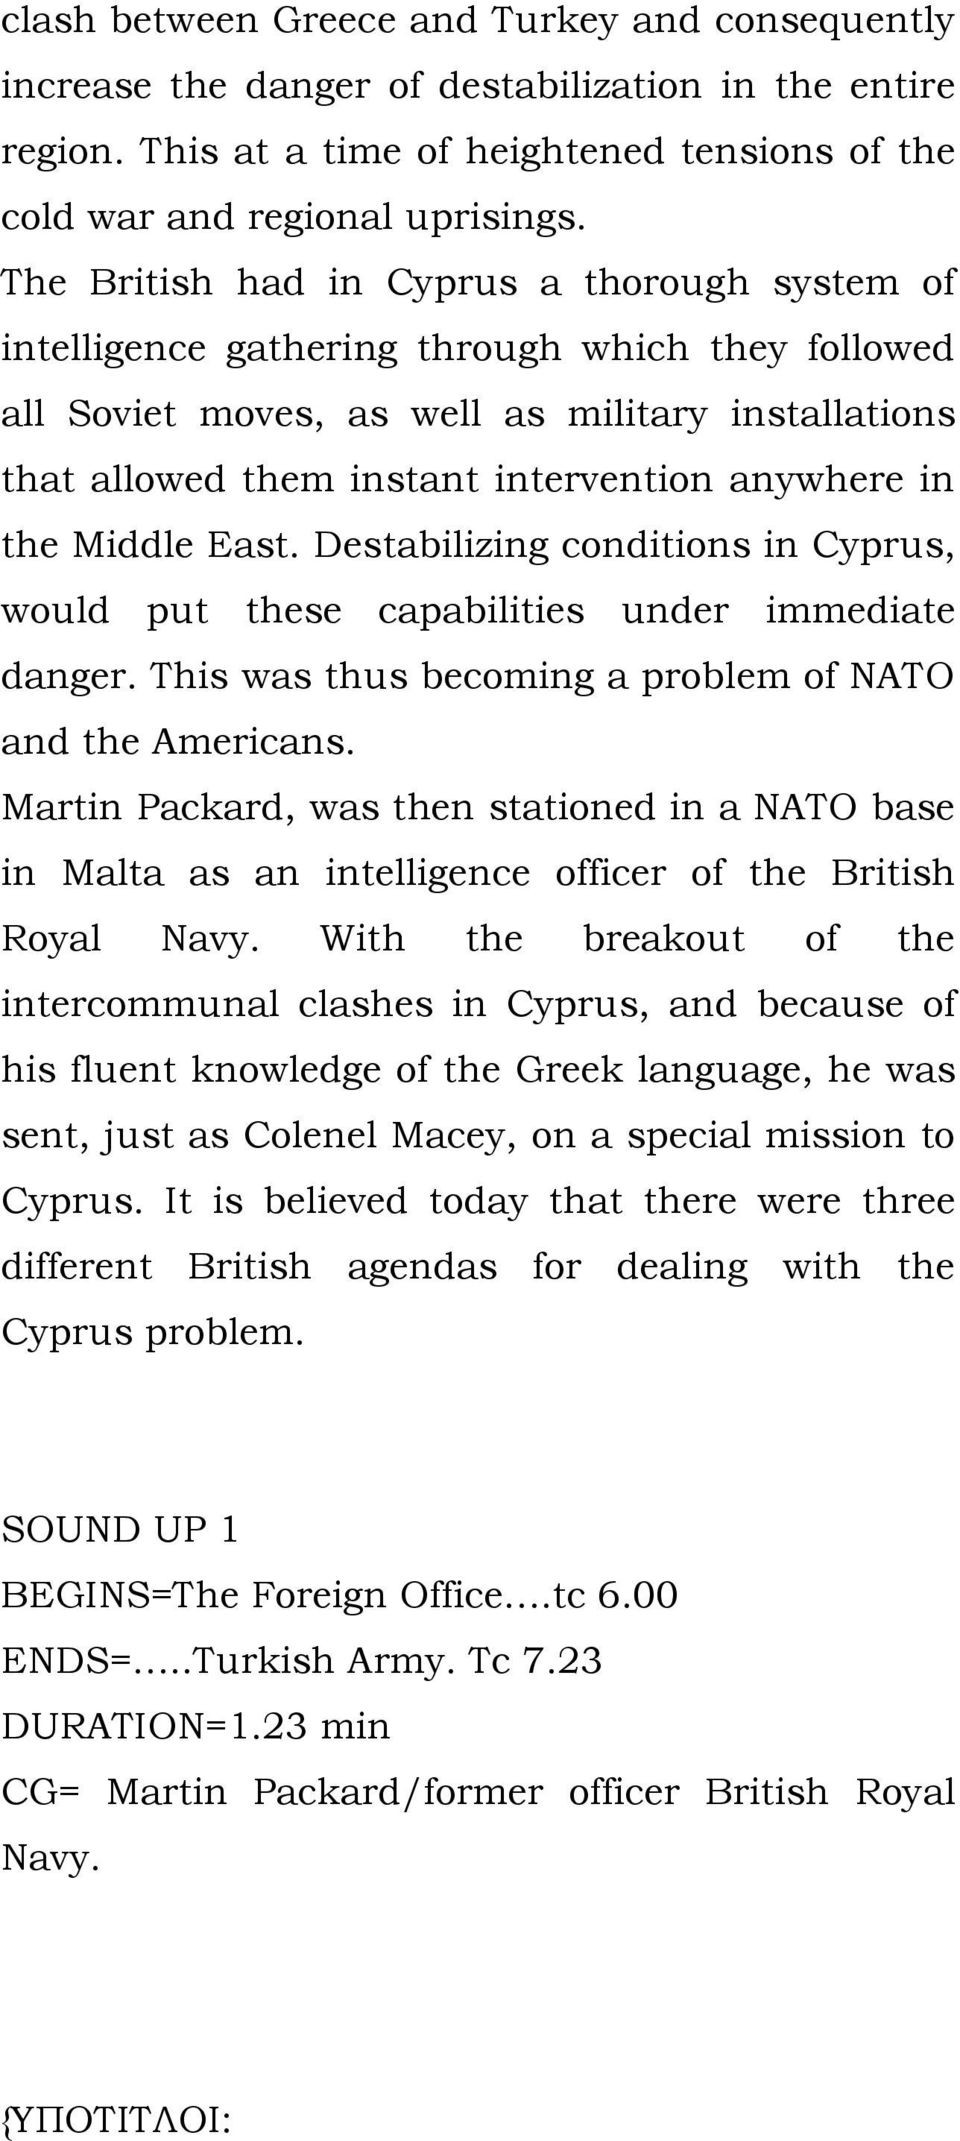 in the Middle East. Destabilizing conditions in Cyprus, would put these capabilities under immediate danger. This was thus becoming a problem of NATO and the Americans.